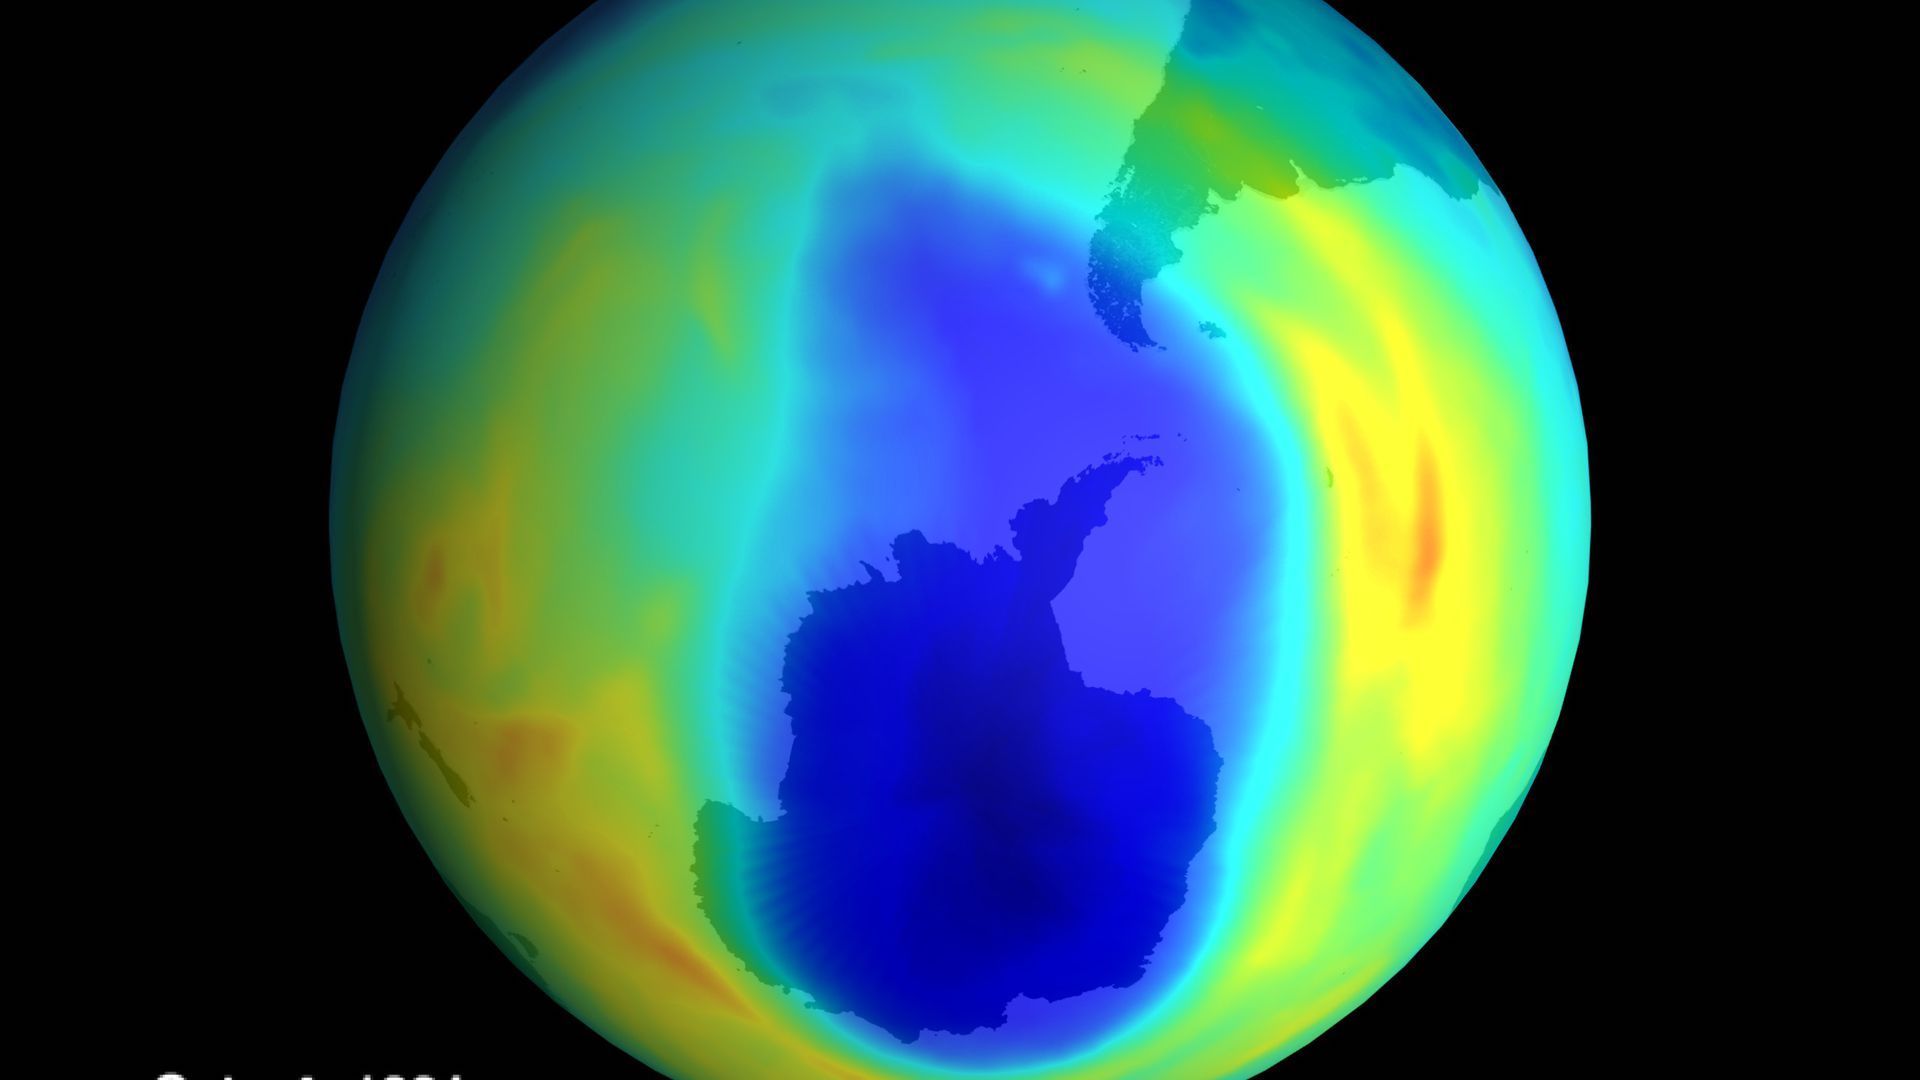 Visualization of the Antarctic ozone hole from 1991, two years after the Montreal Protocol went into effect.